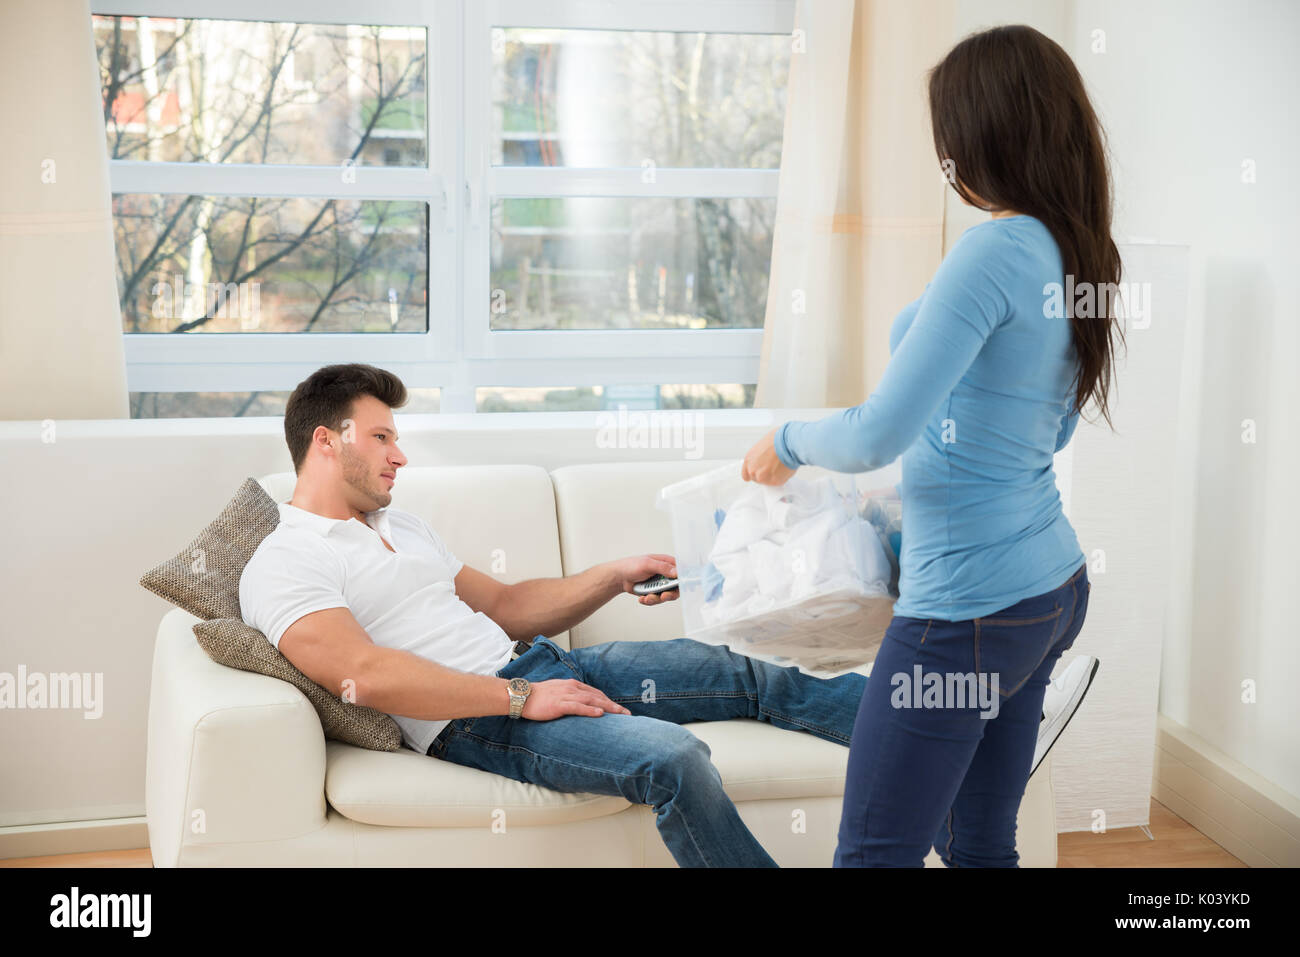 Woman Holding Laundry Basket Looking At Man Using Remote Control Stock Photo